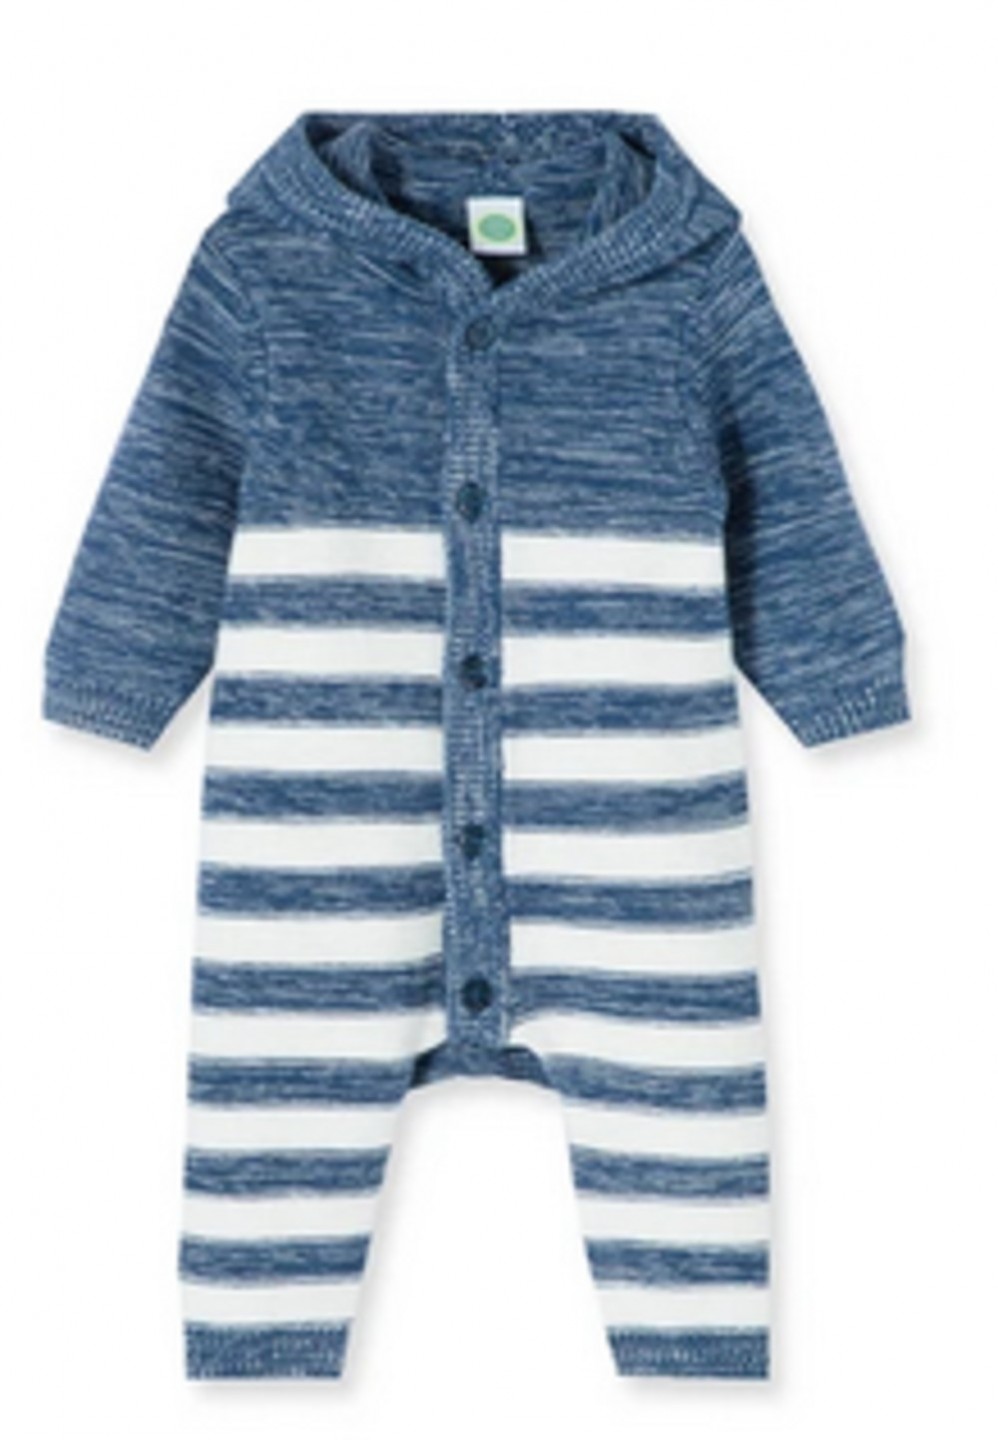 LITTLE ME BABY BOYS BLUE MARLED SWEATER COVERALLS